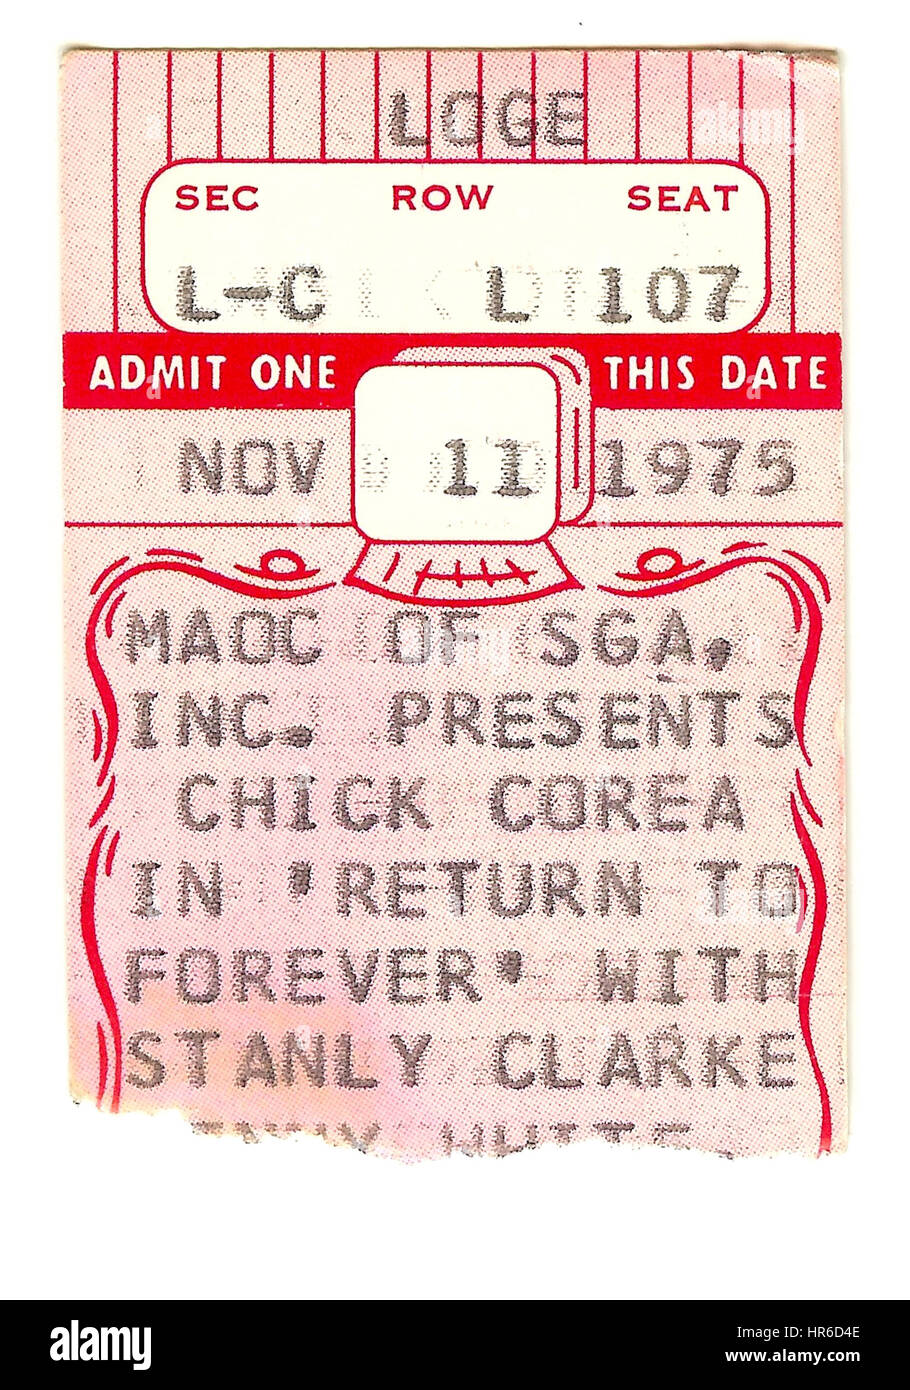 NEW YORK, NY - NOVEMBER 11: Ticket Stub of Return To Forever (Chick Corea, Stanley Clarke, Al Di Meola & Lenny White) performing at the Beacon Theater in New York City on November 11, 1975 Stock Photo